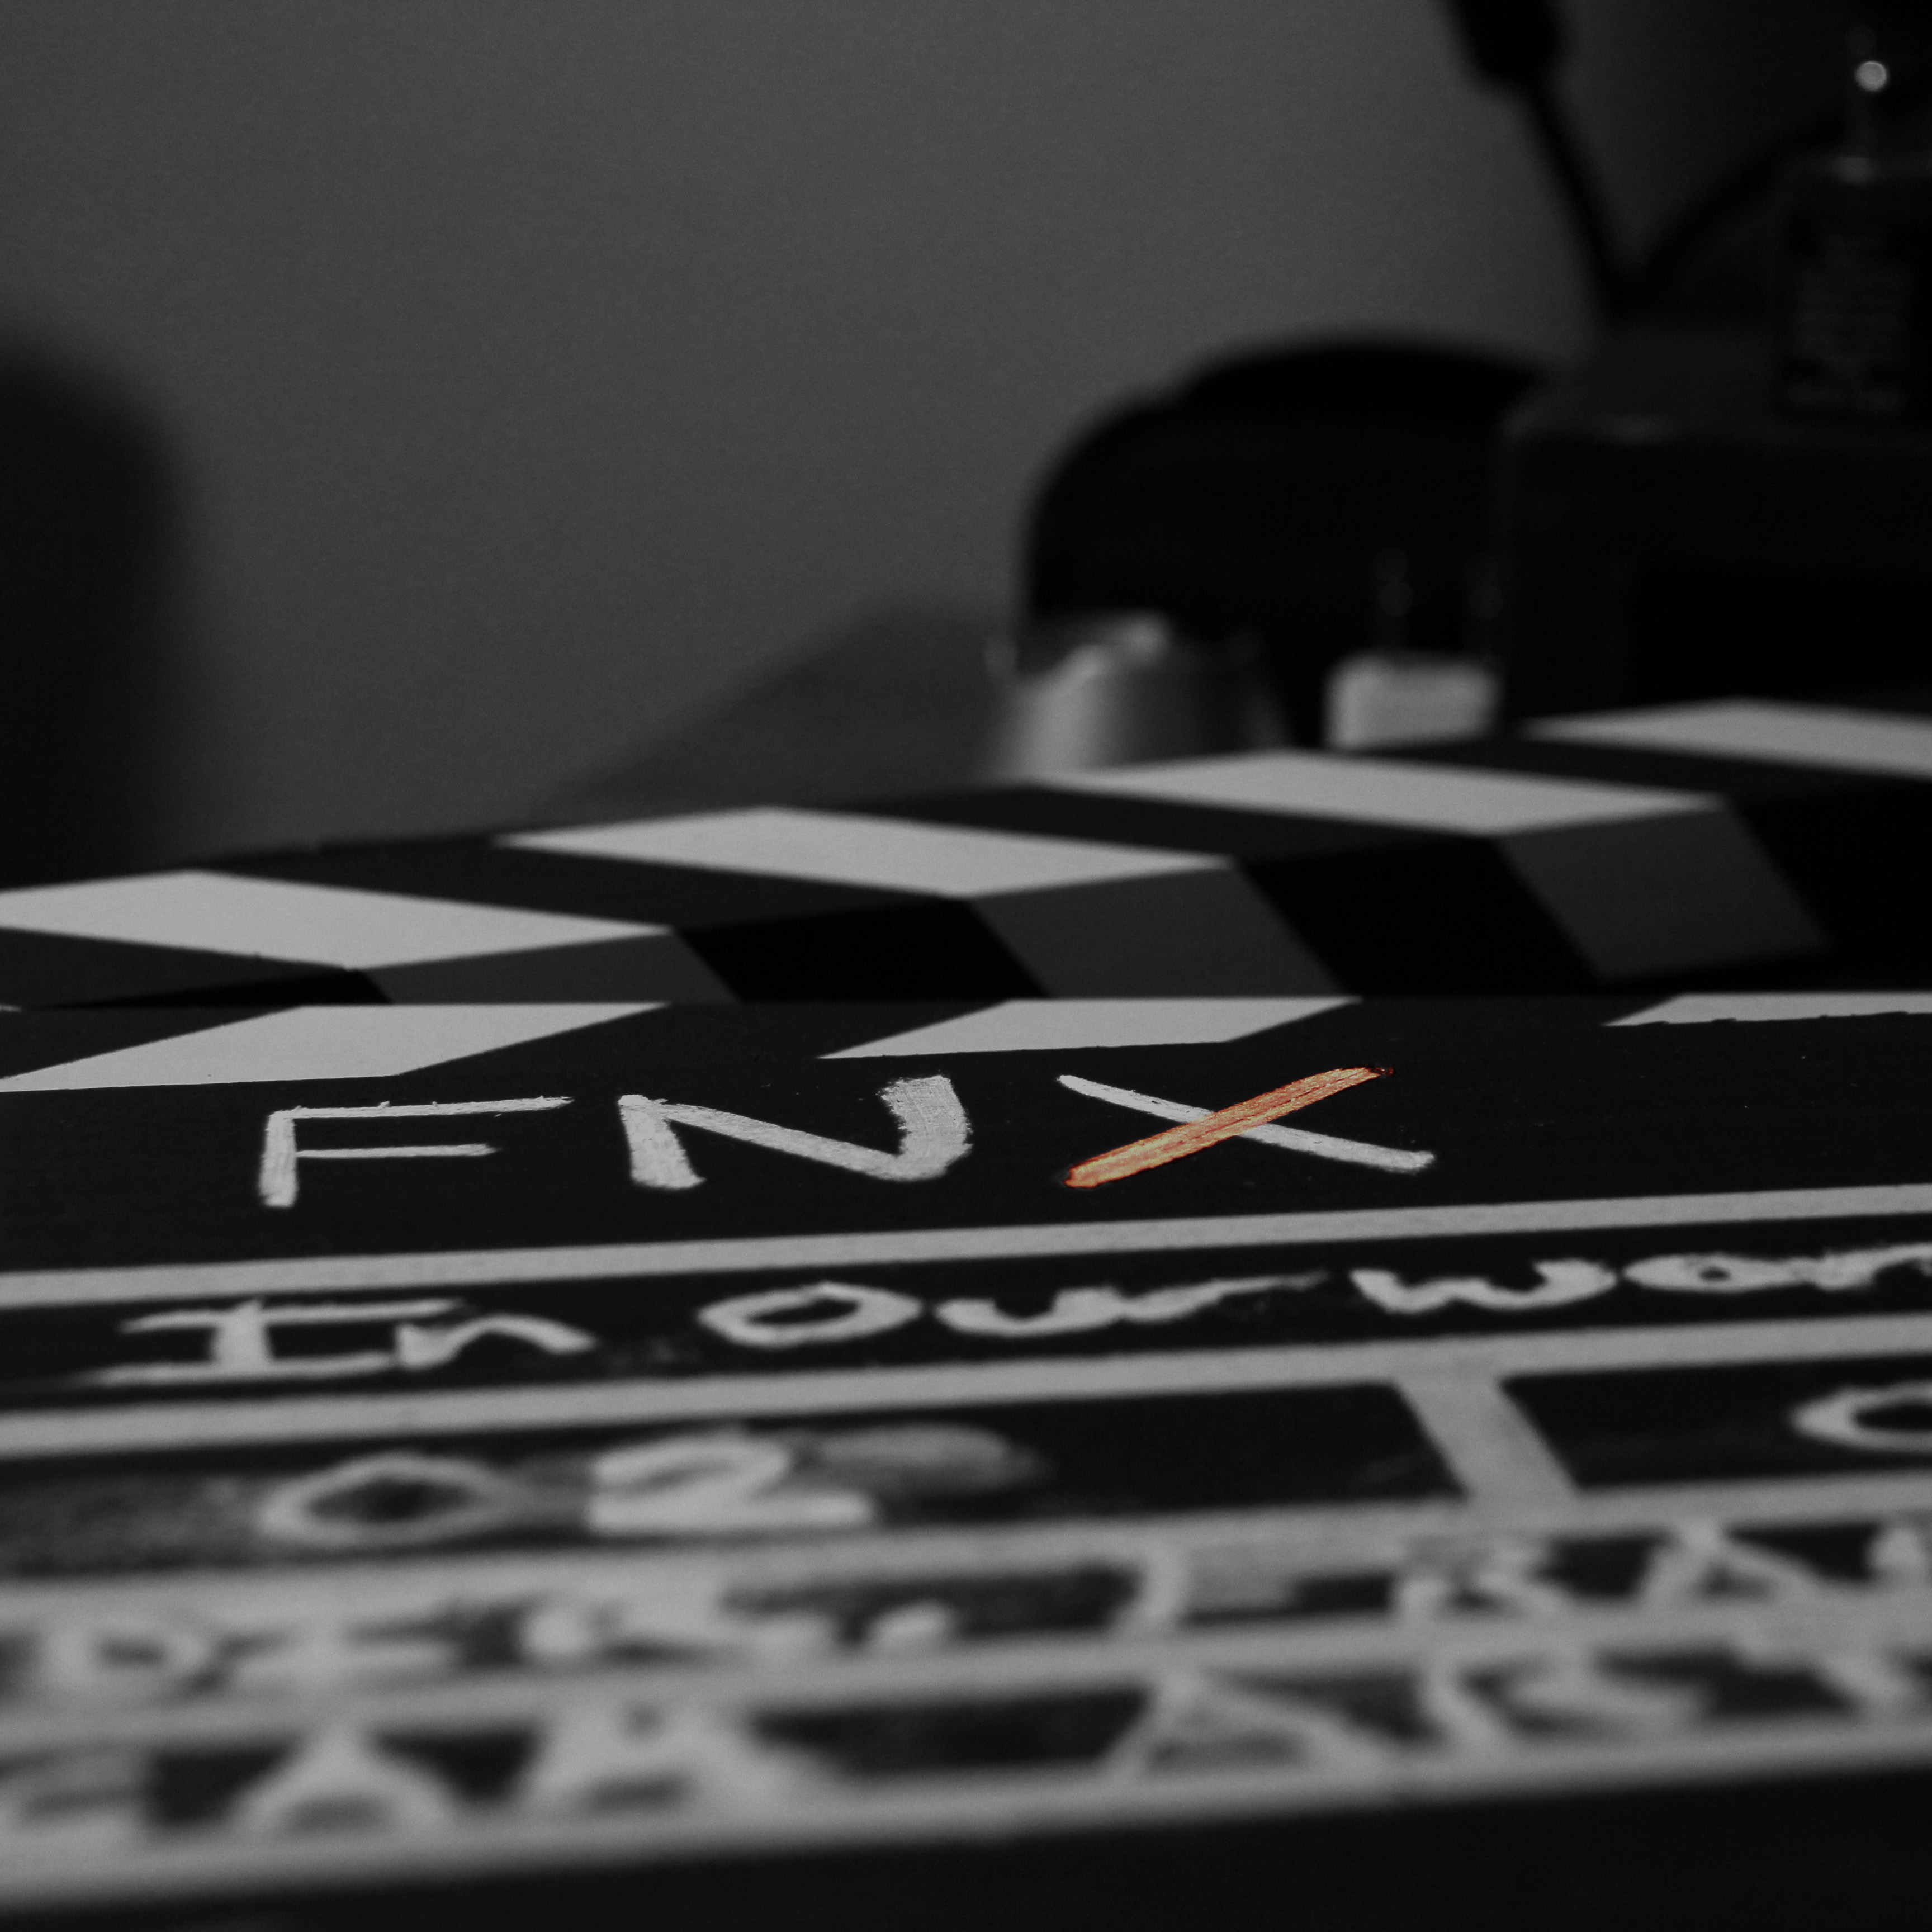 FNX - First Nations Exeperience